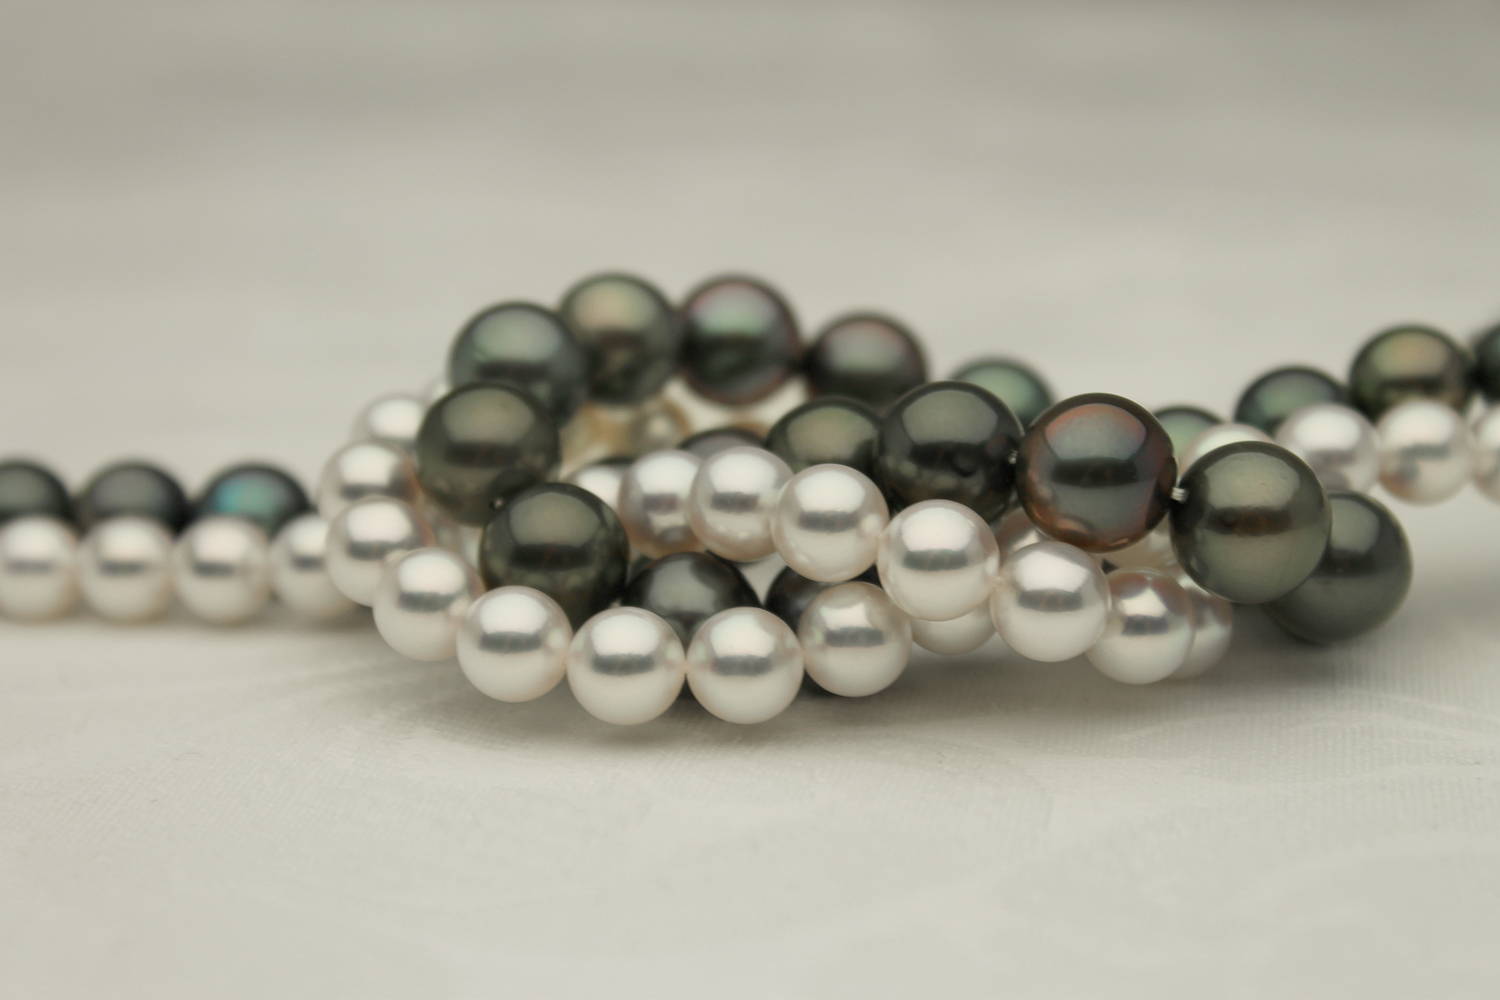 Black Tahitian Pearls and White Akoya Pearls Twisted Together In Front of a Grey Background